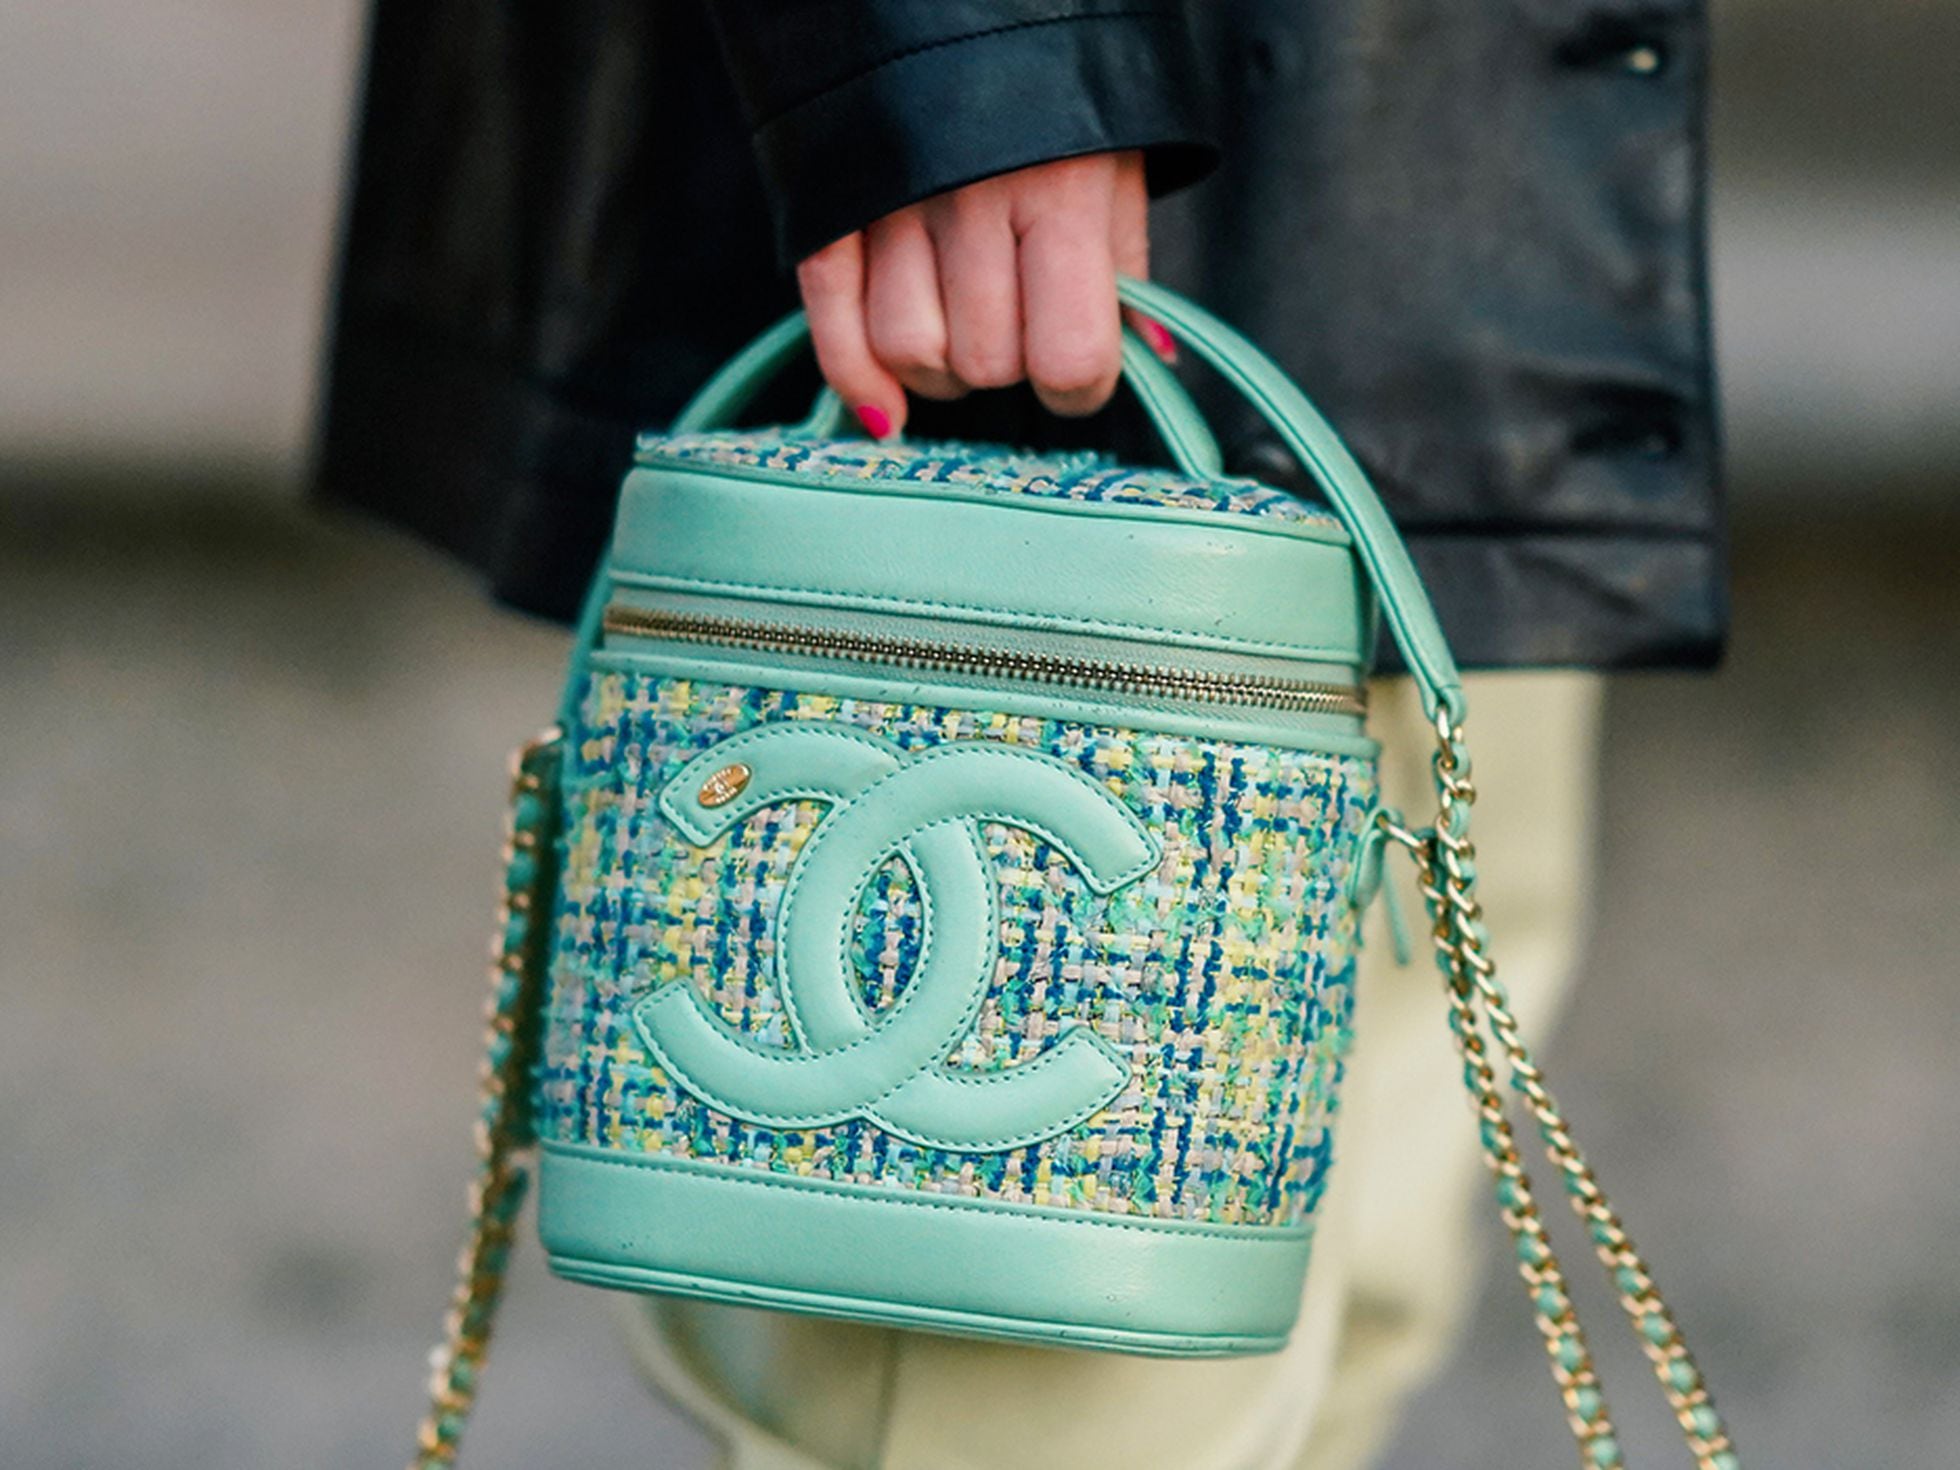 How to tell a 'superfake' handbag from the real deal